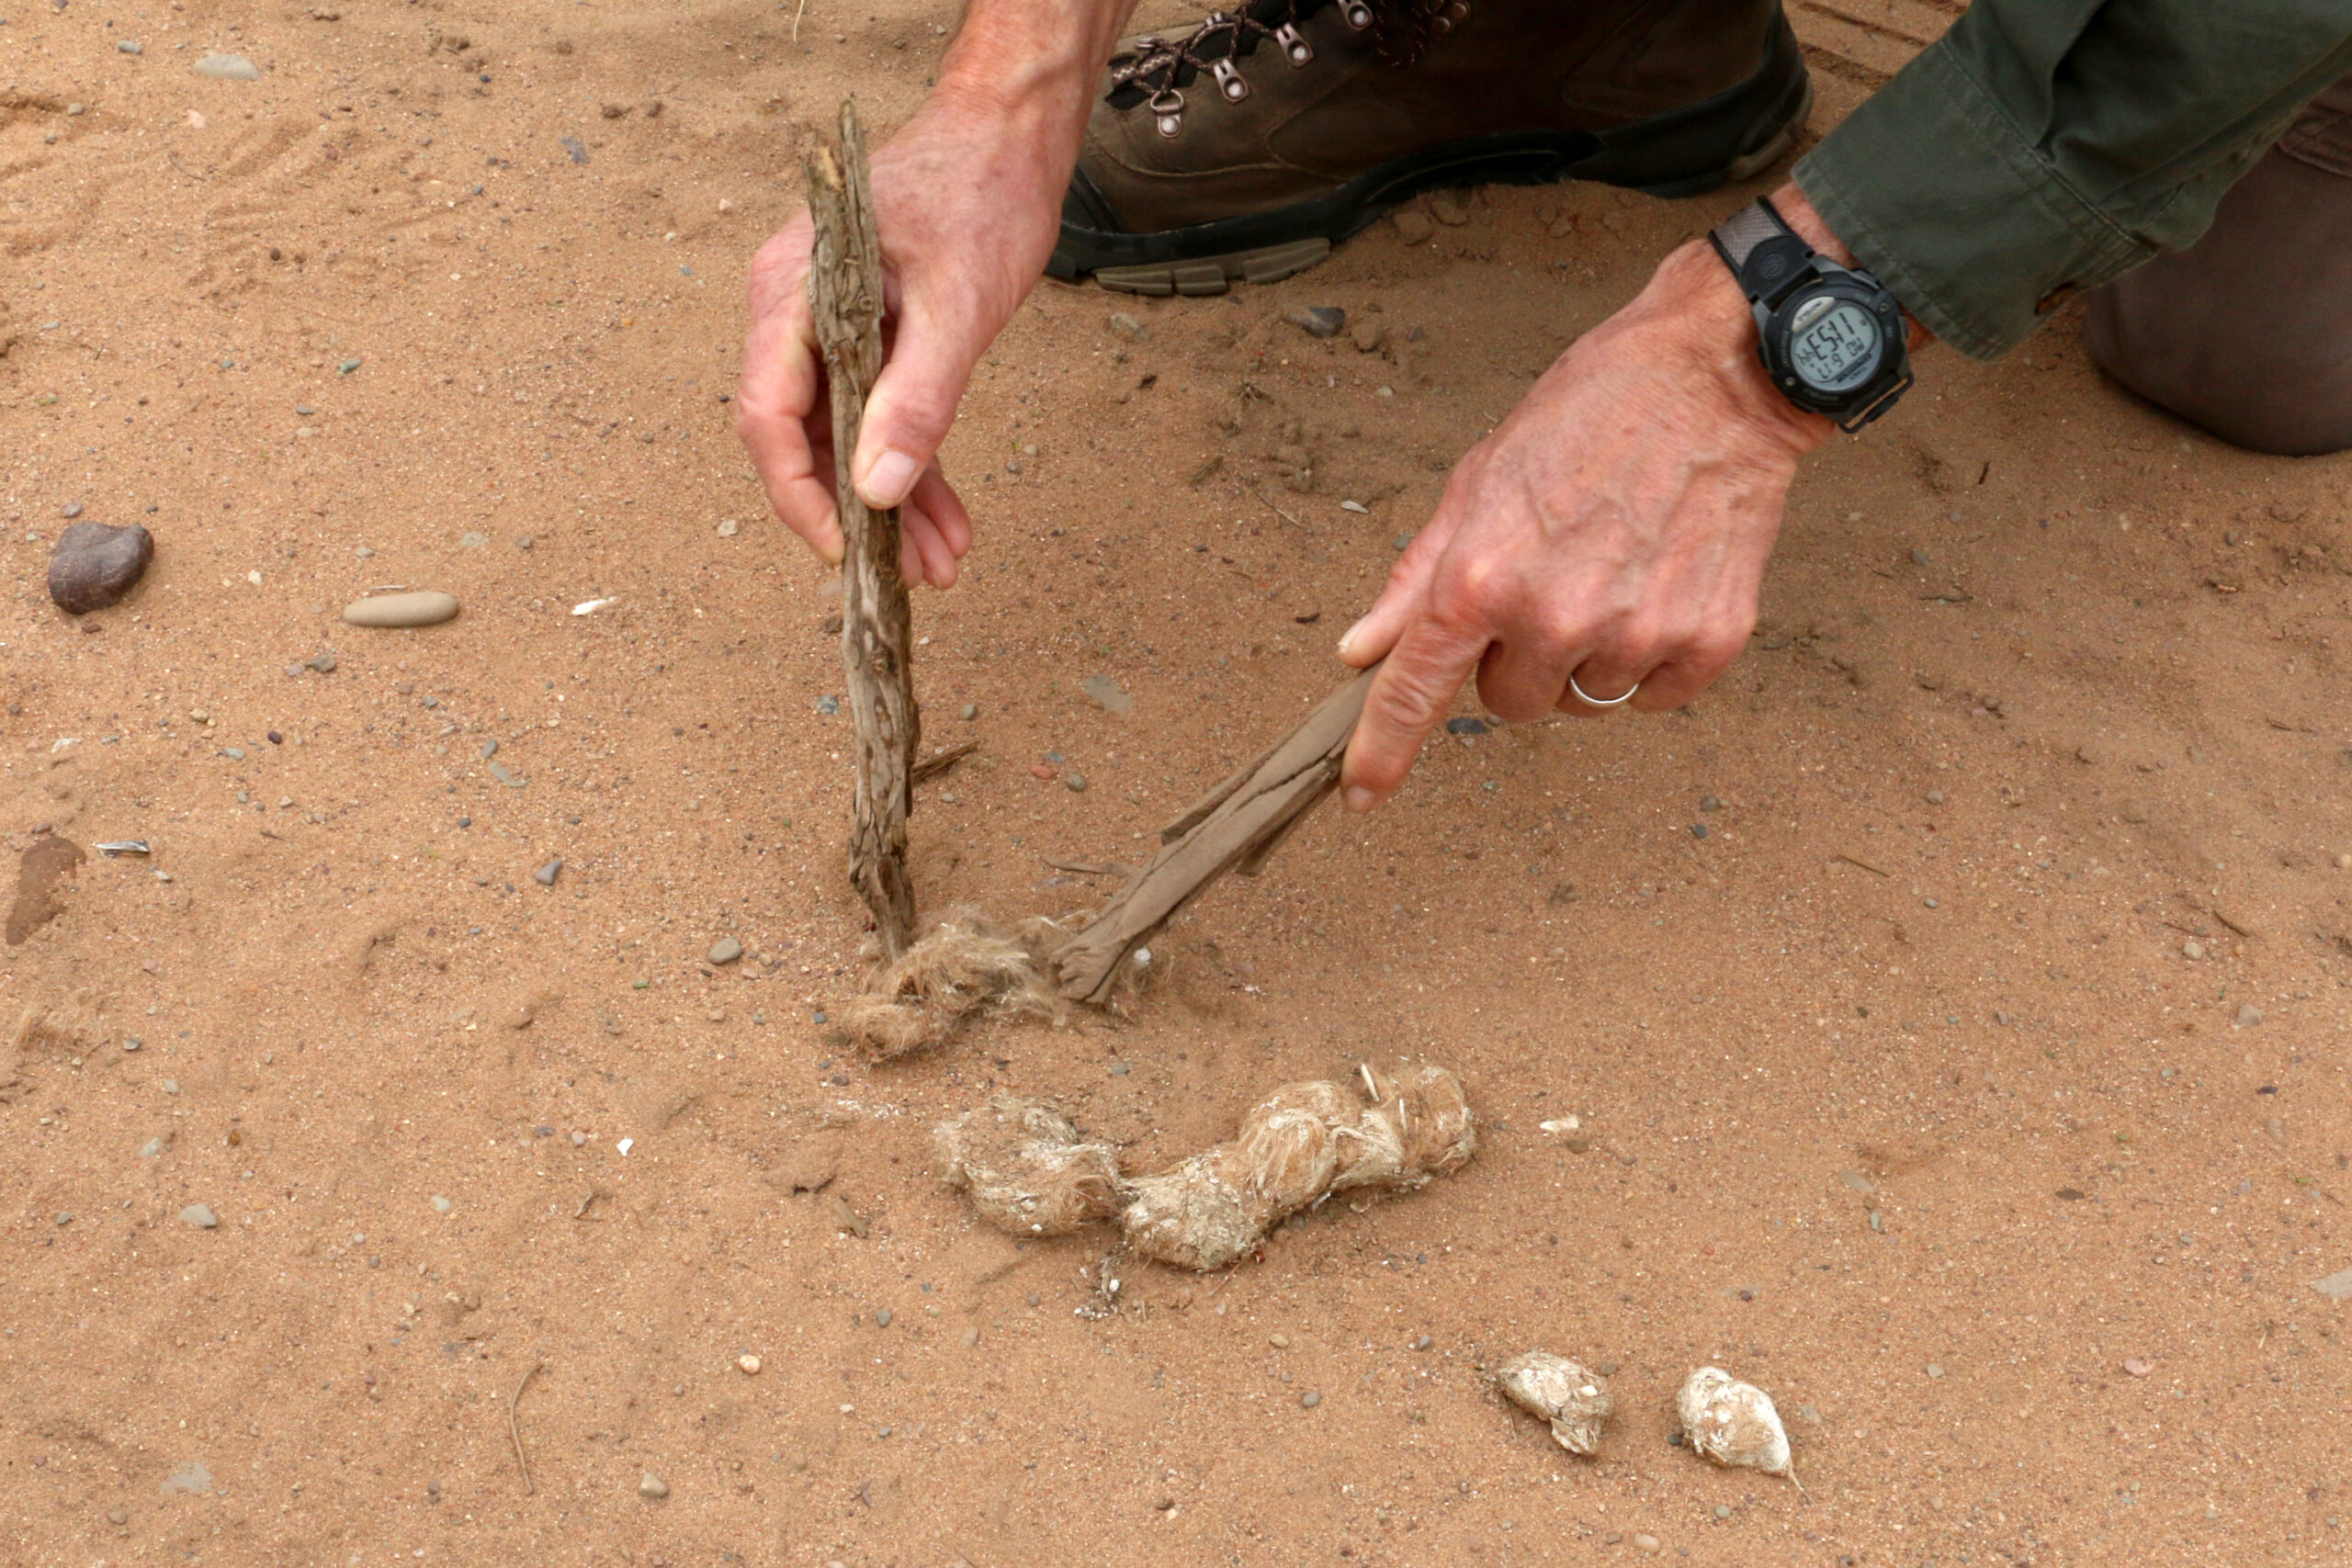 Adrian Wydeven uses two sticks to pull apart wolf scat